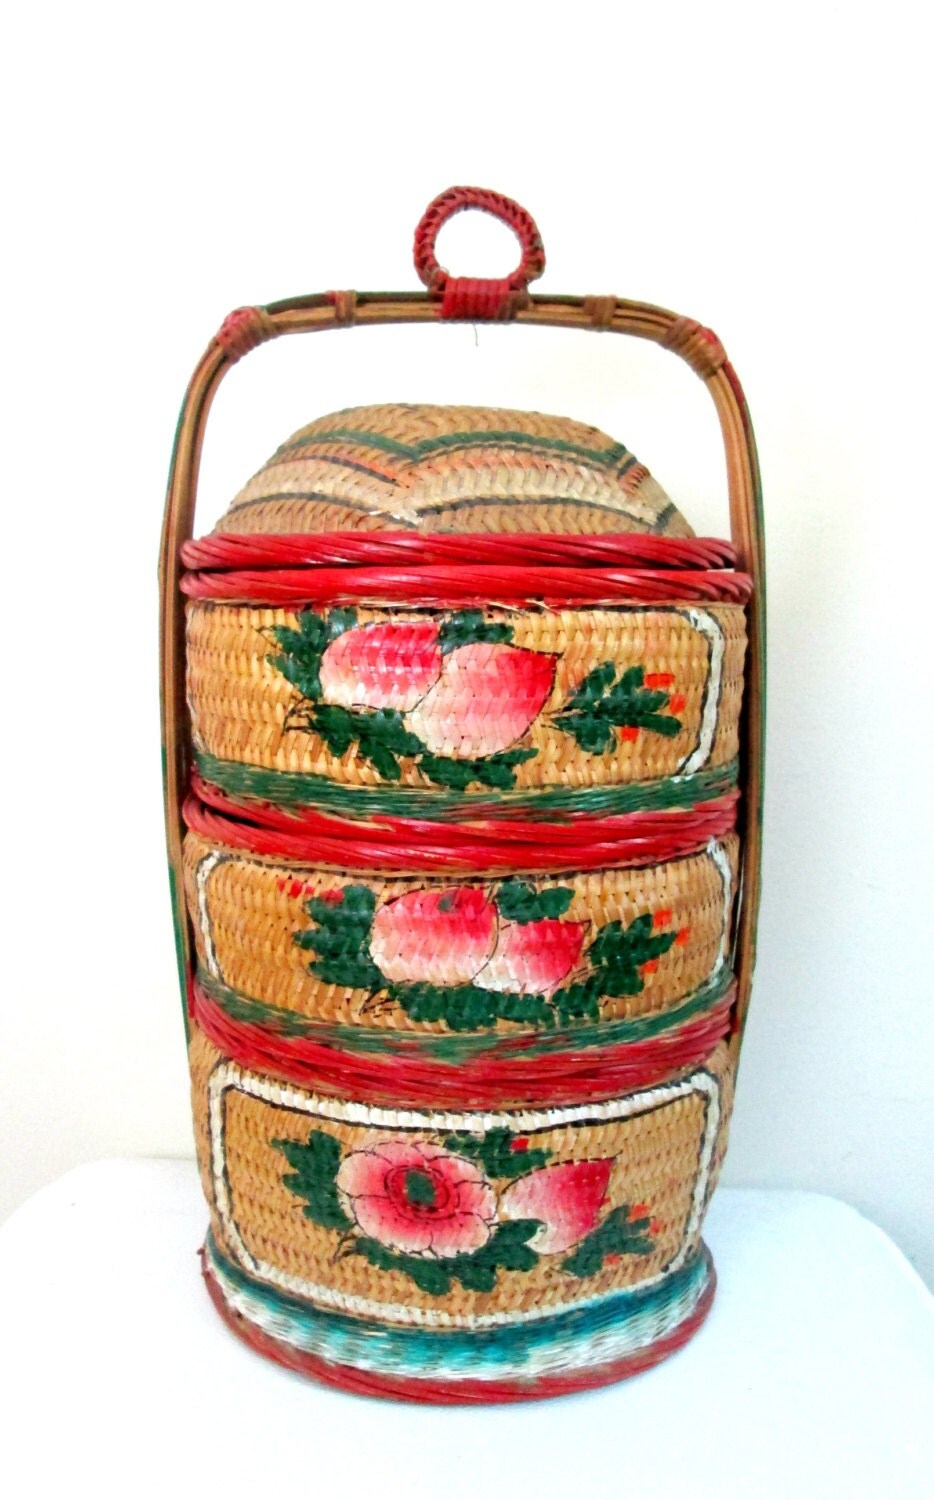 large sewing basket with compartments